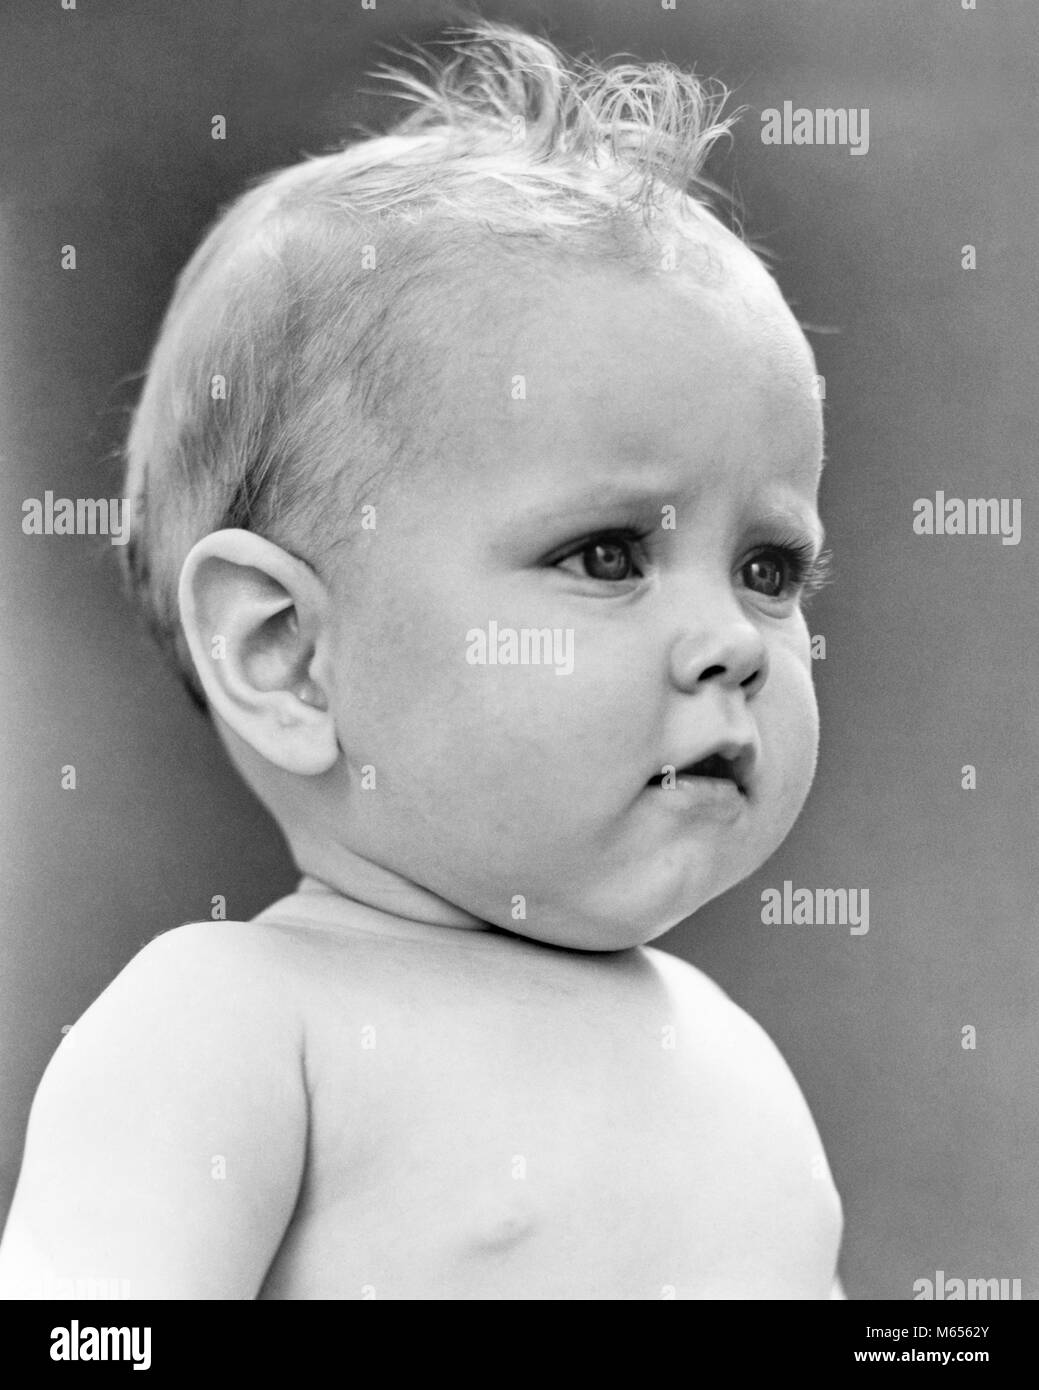 1930s 8 MONTH YEAR OLD BABY PROFILE HEAD & SHOULDERS SERIOUS POUT EXPRESSION - b396 HAR001 HARS YEAR OLD Stock Photo